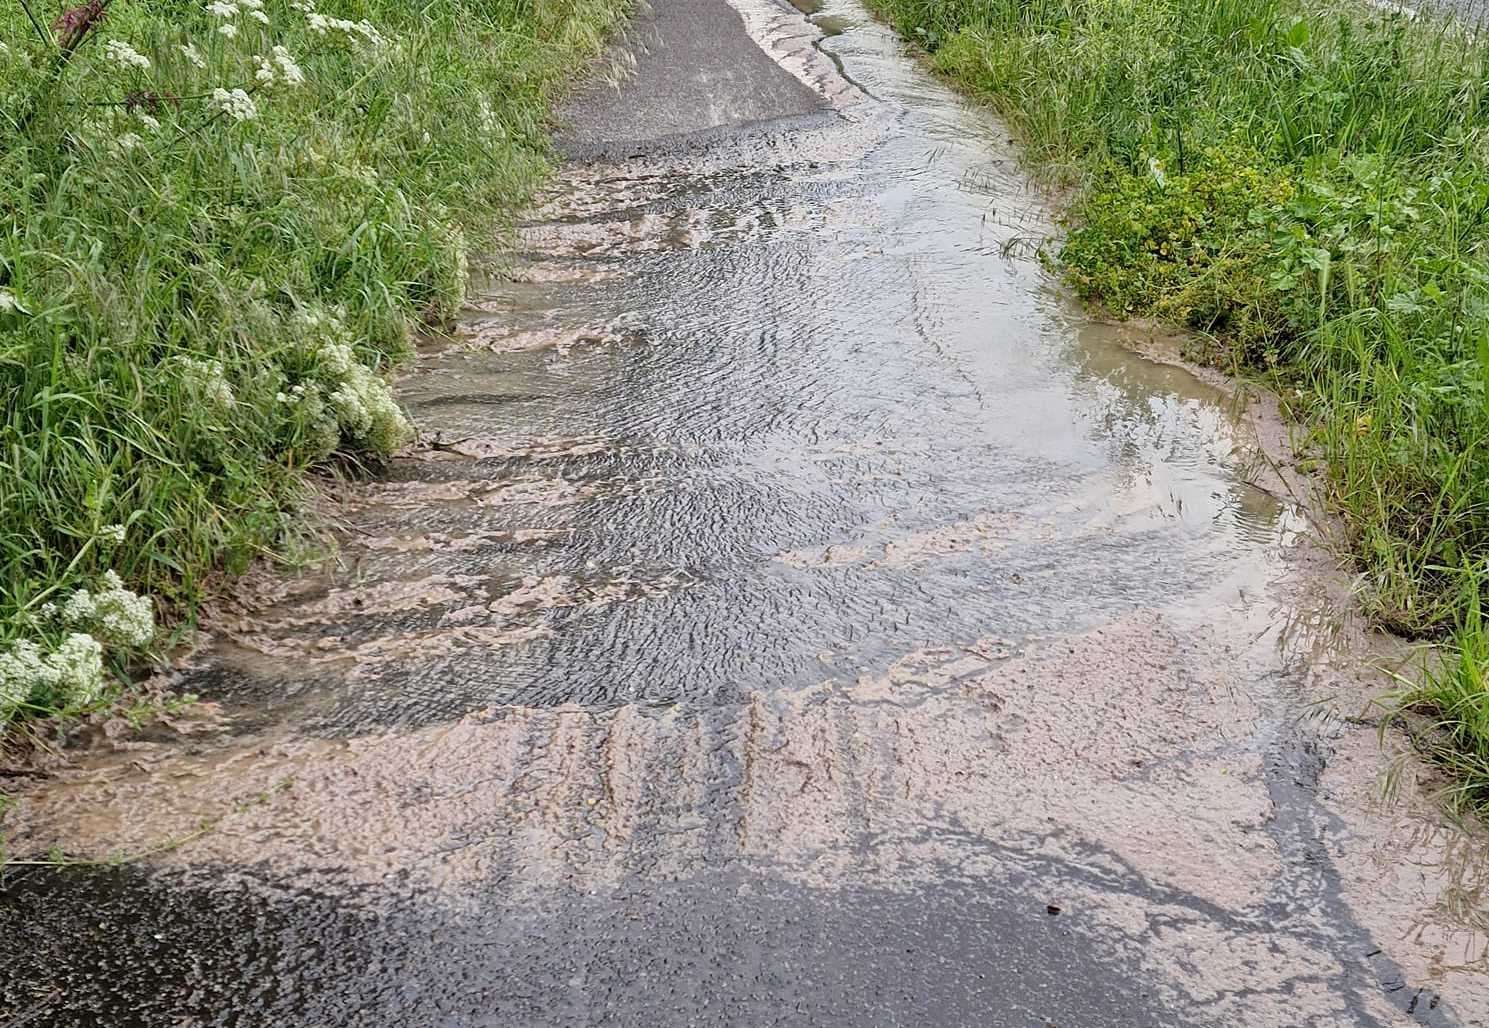 Sewage can be seen spilling onto the path next to a turnoff on the A282 in Dartford, near the Holiday Inn